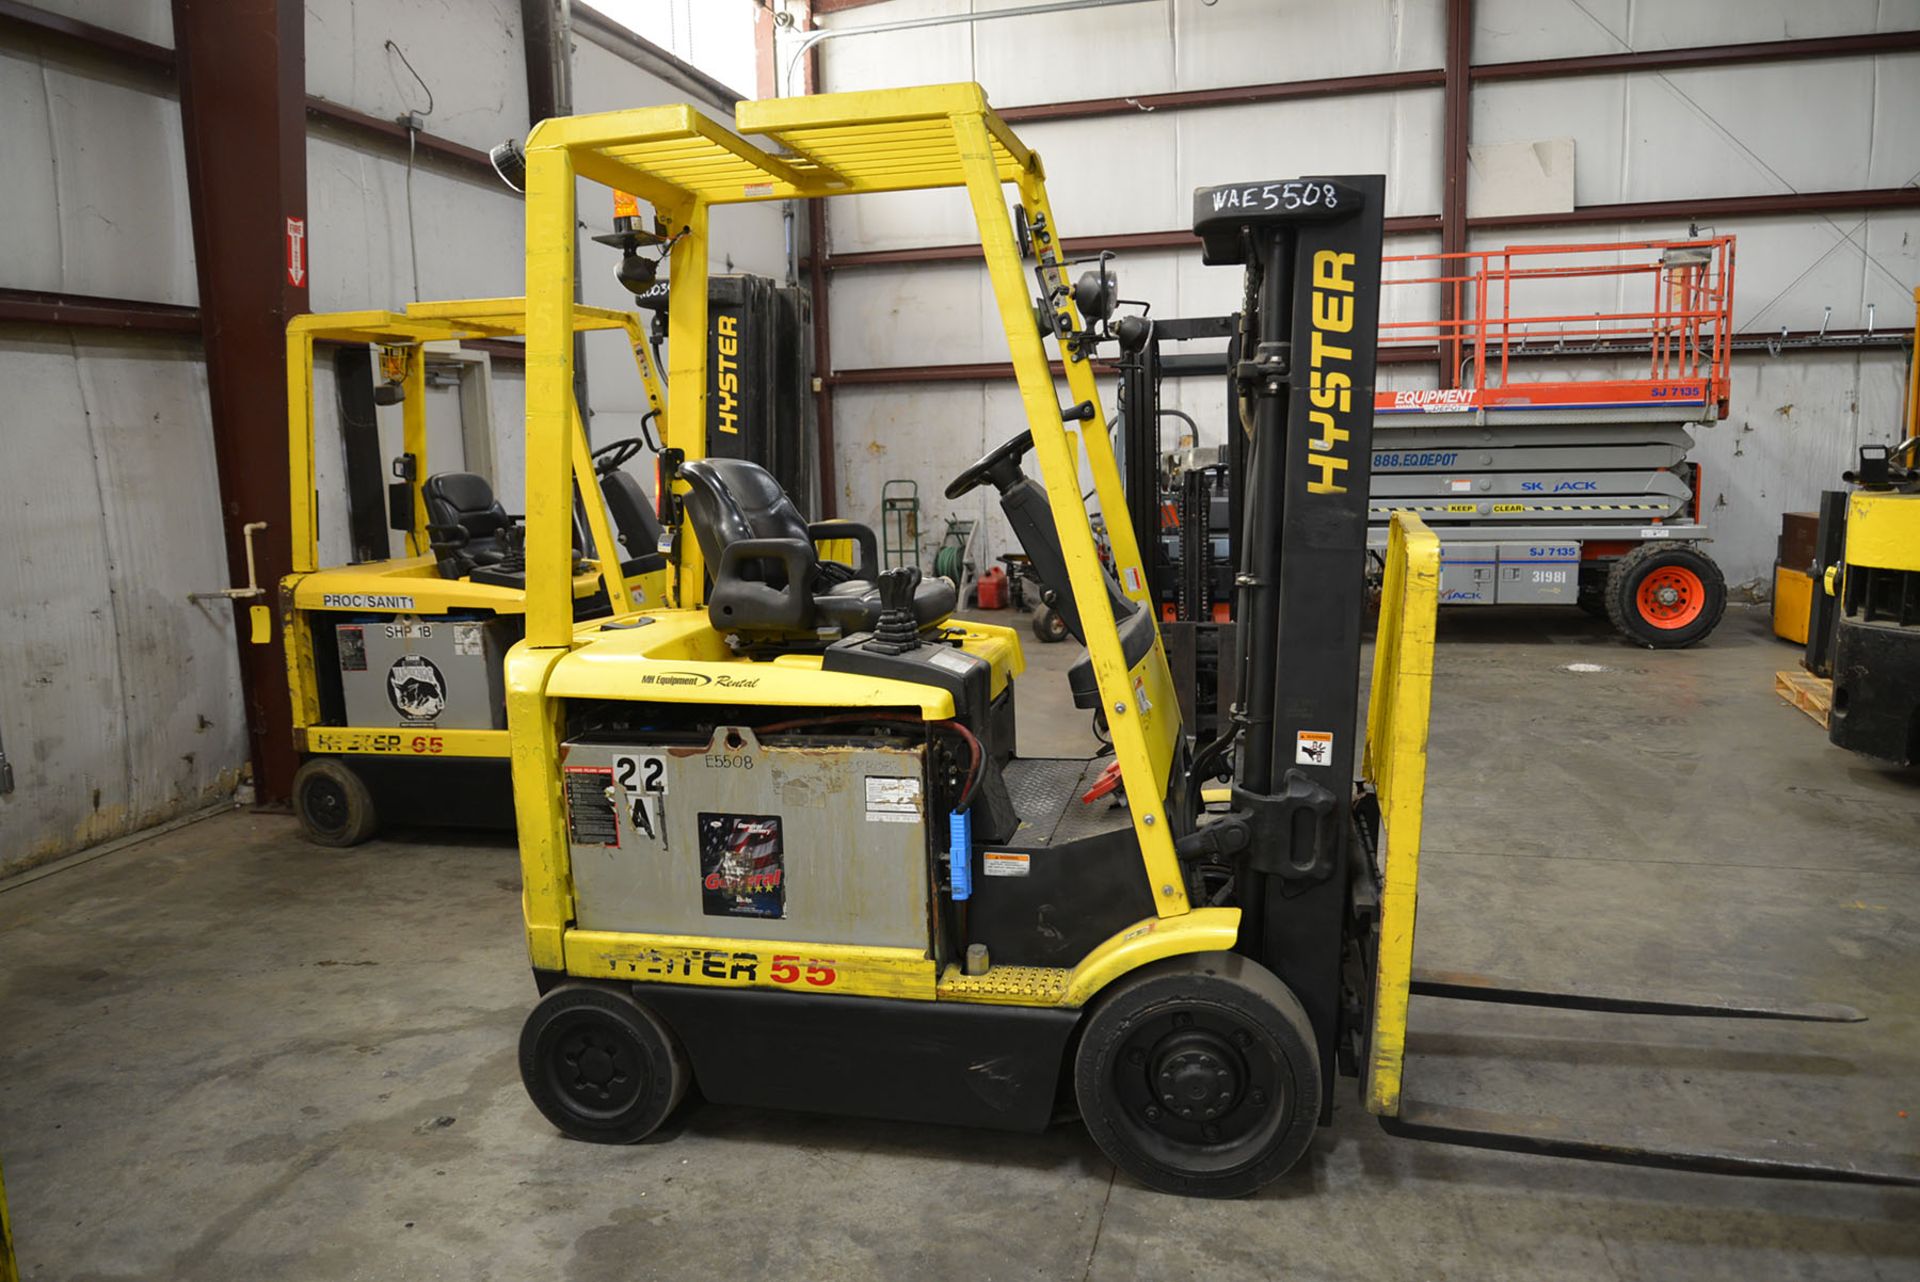 2007 HYSTER 5,500-LB., MODEL: E55Z-33, SN: G108N06319E, 48V ELECTRIC, SOLID TIRES, MONOTROL, 3-STAGE - Image 3 of 6